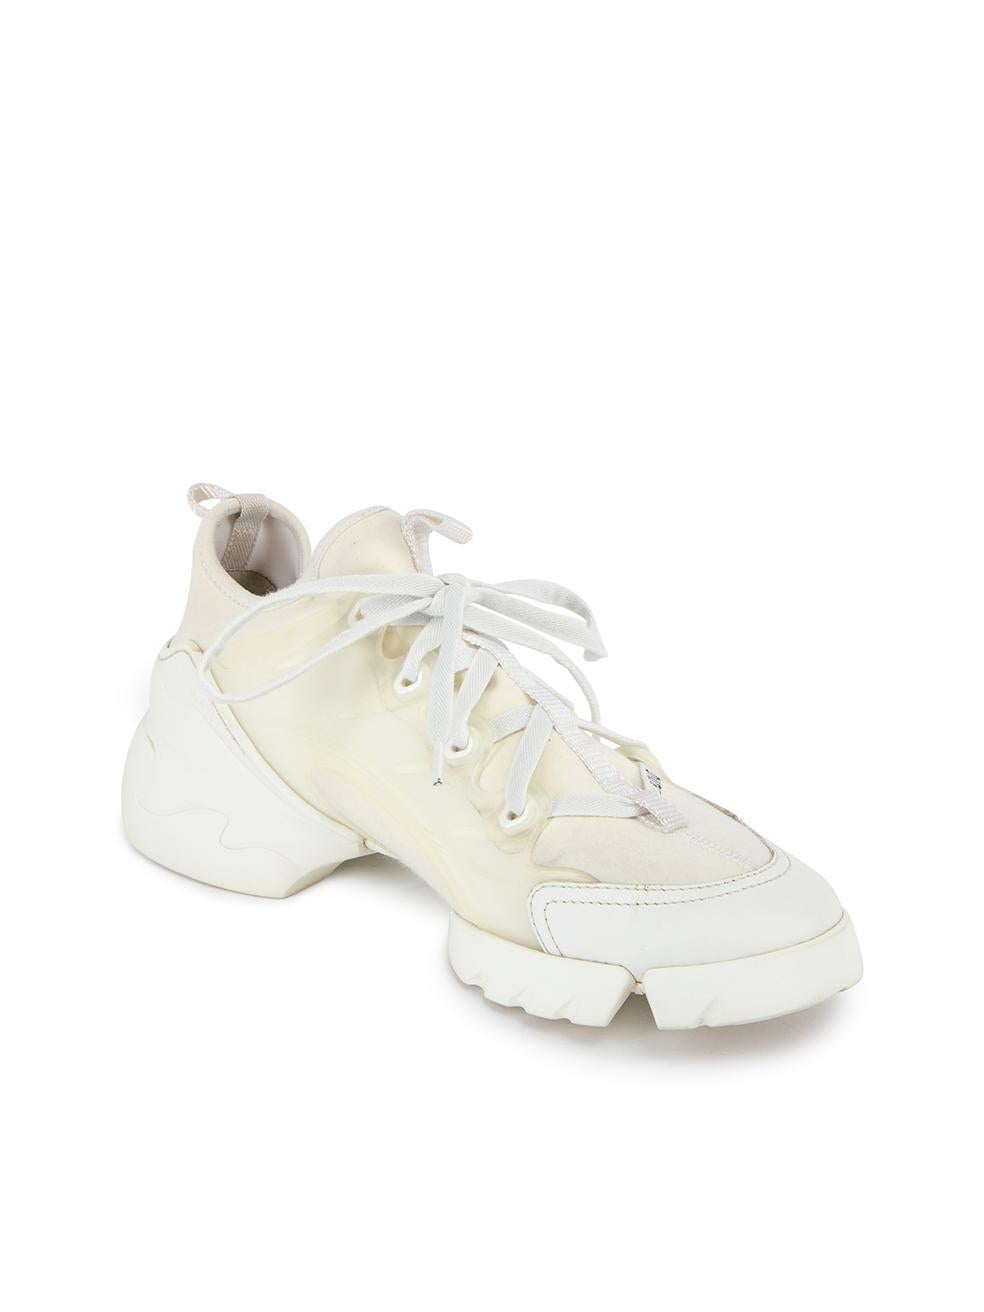 CONDITION is Very good. Minimal wear to trainers is evident. Minimal wear to exterior leather material and scuffs can be seen on the rubber sole on this used Dior designer resale item. This item comes with original dustbags. Details White Cloth